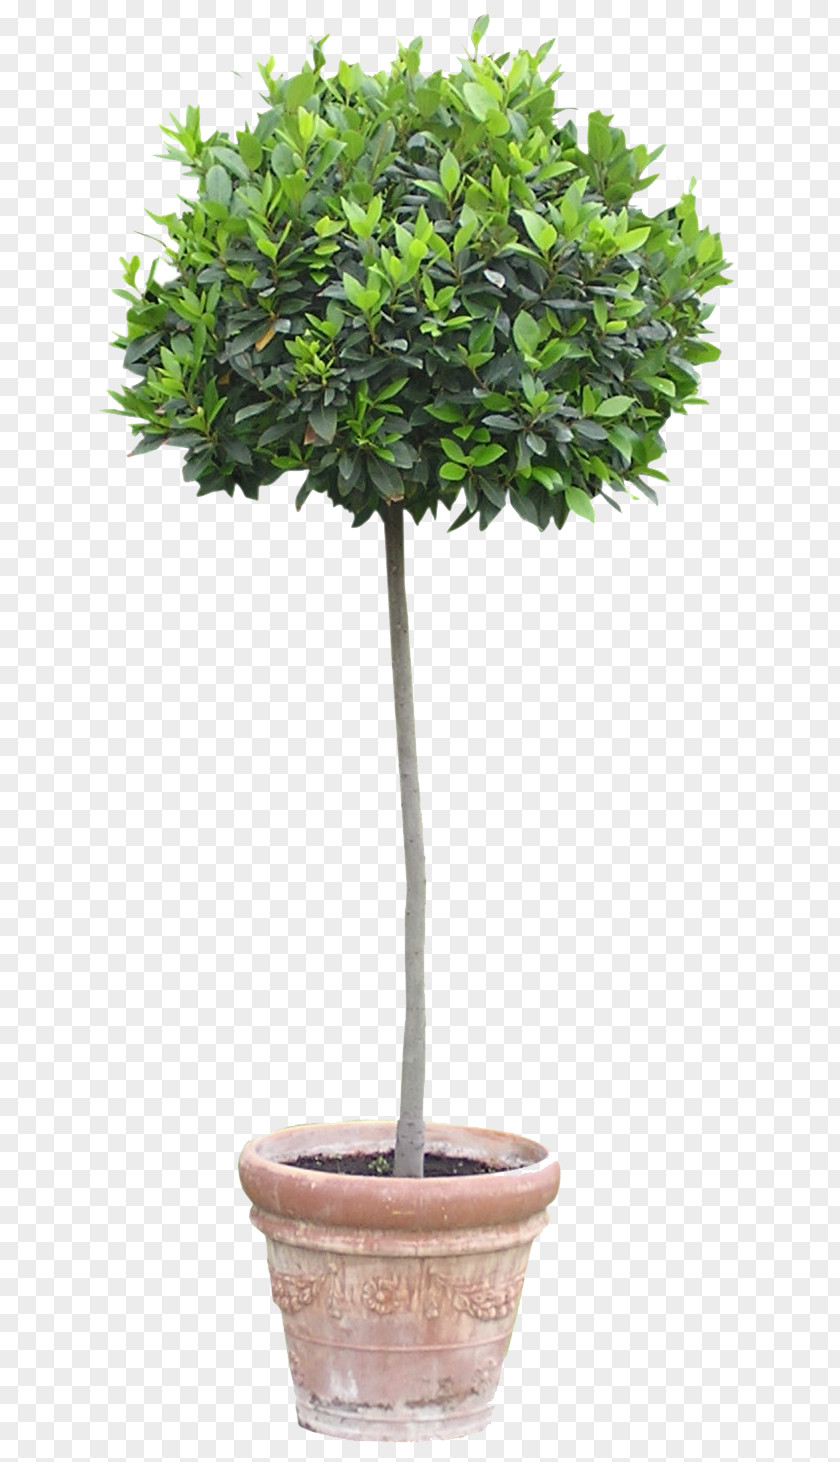 Forget Me Not Flowerpot Houseplant Tree PNG